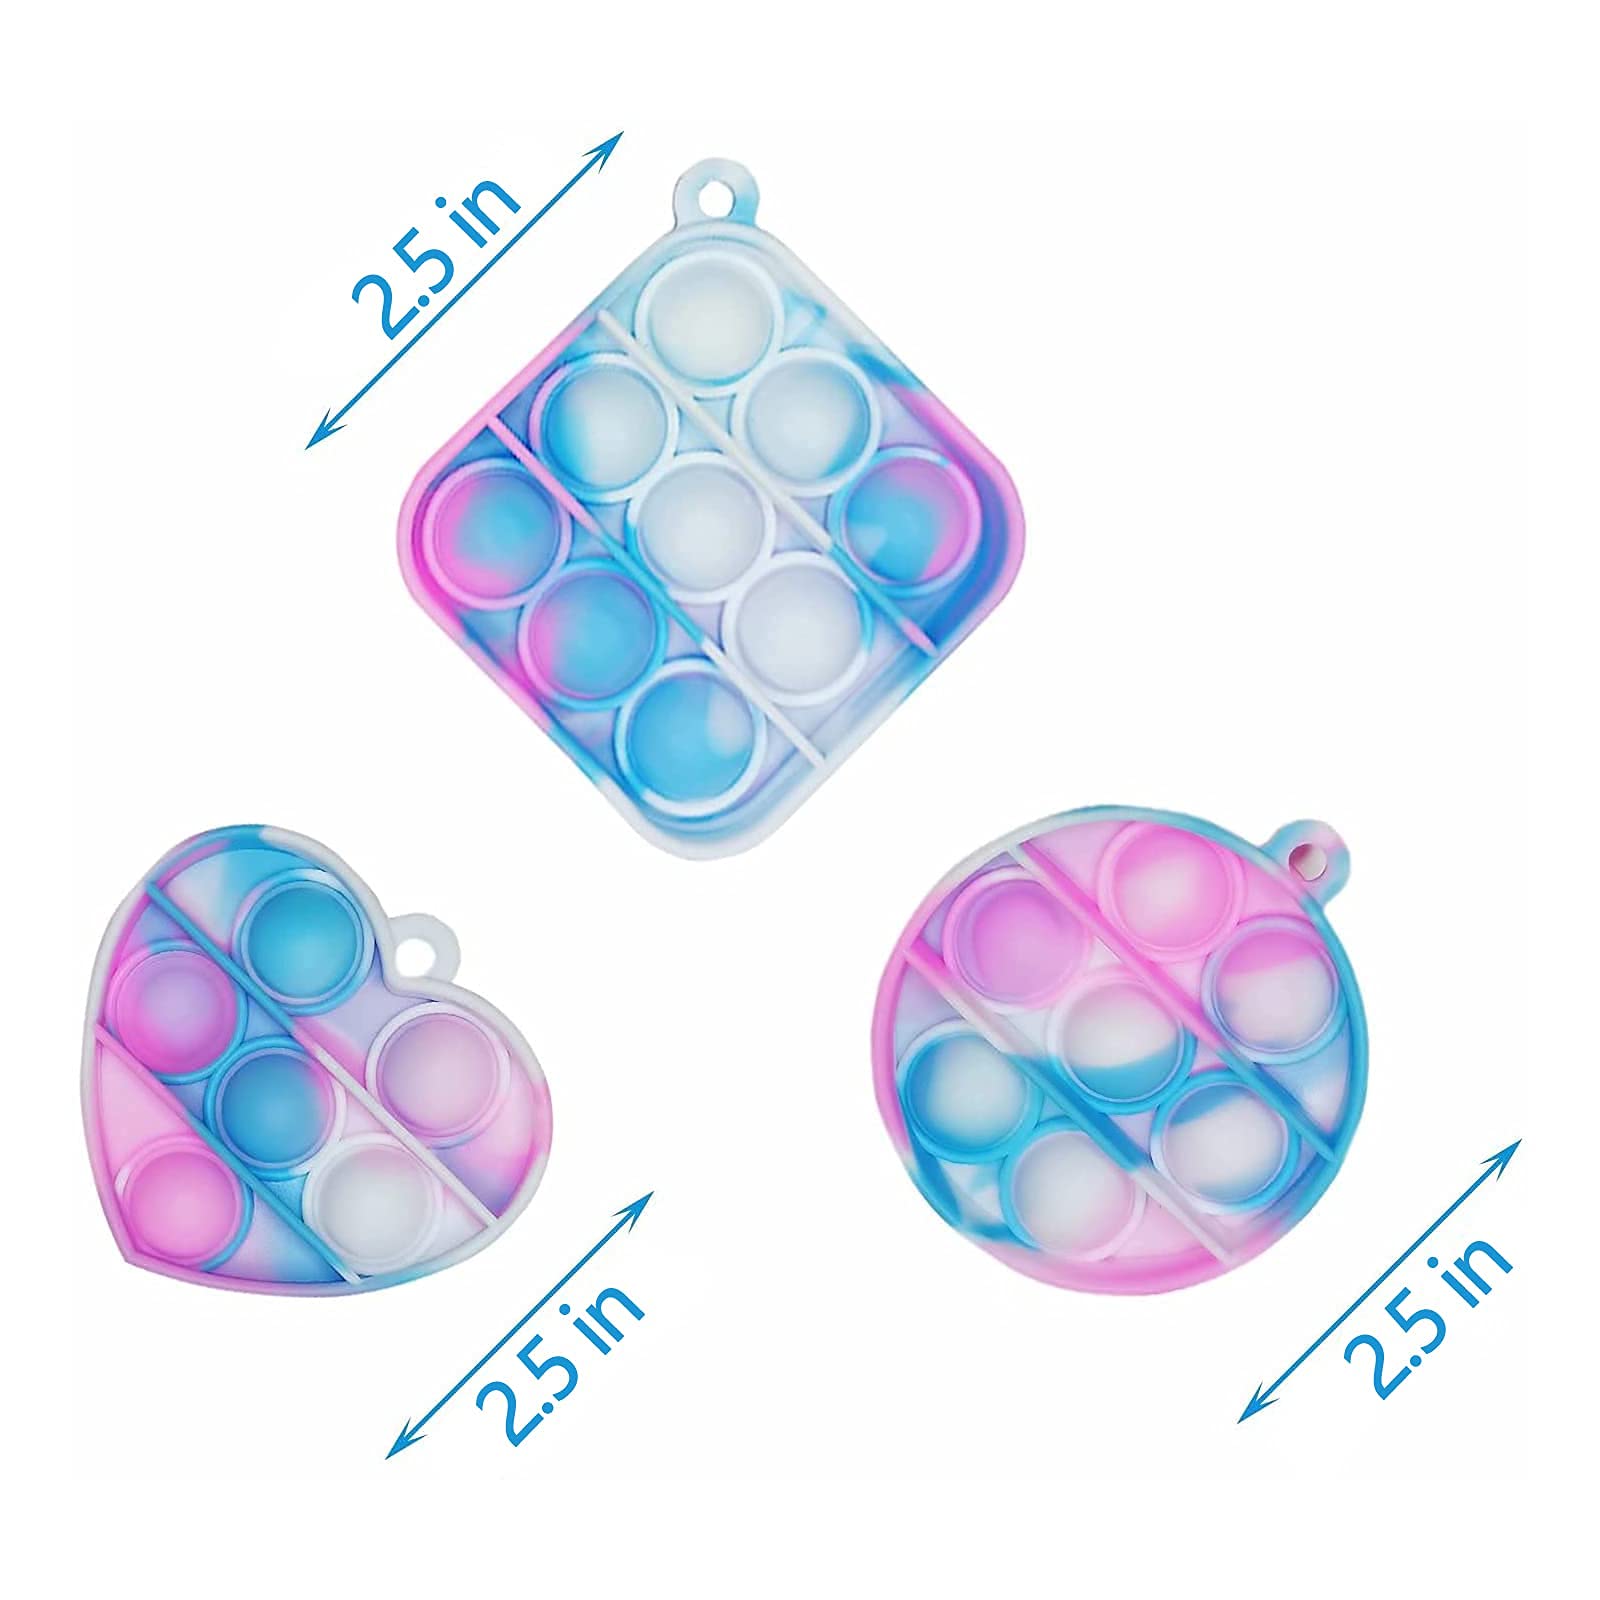 15 Pcs Mini Squeeze Pop Bubble Simple Fidget Sensory Toys, Mini Silicone Keychain Wrap Small Pop Bulk Classroom Prizes Relieve Anxiety Stress Toy for Kids Adult Party Favors